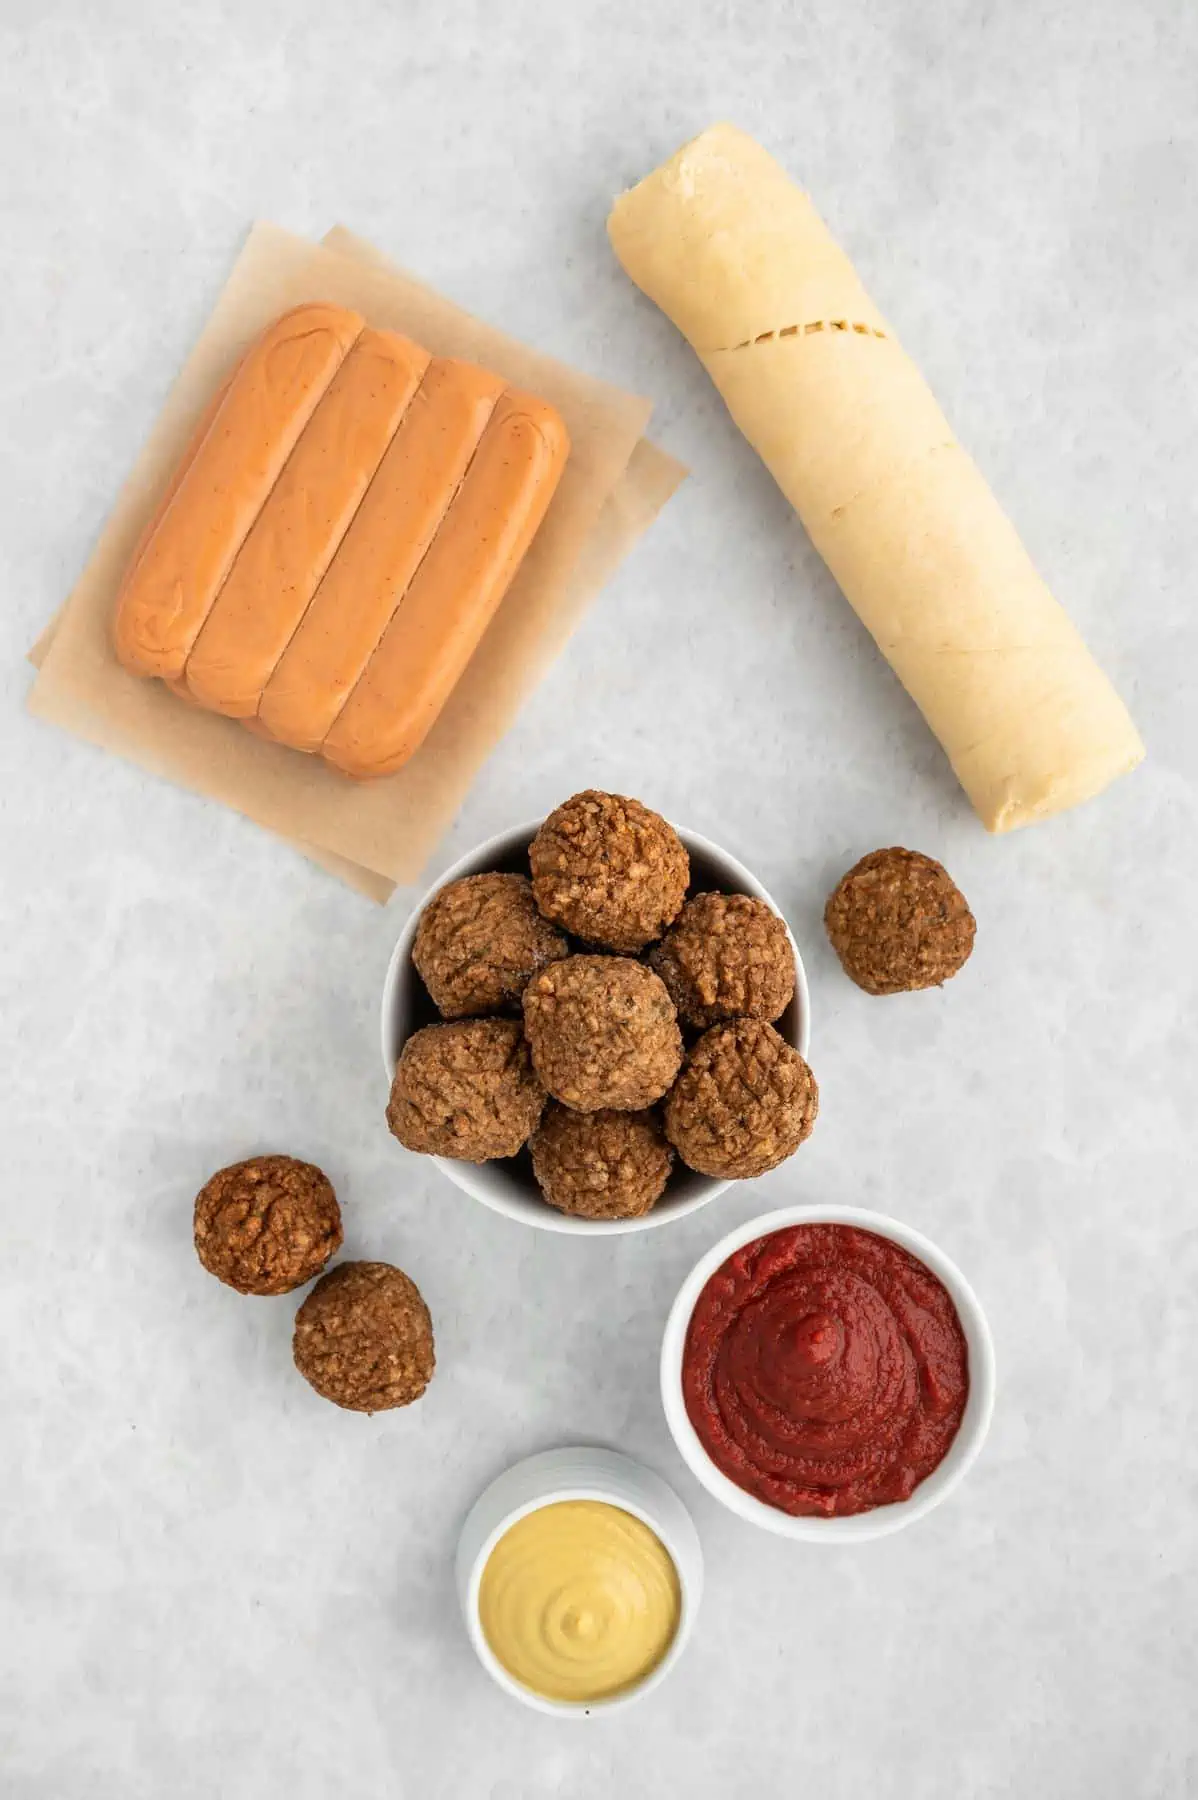 Flatlay of ingredients for vegan mummy dogs and balls on a light background.